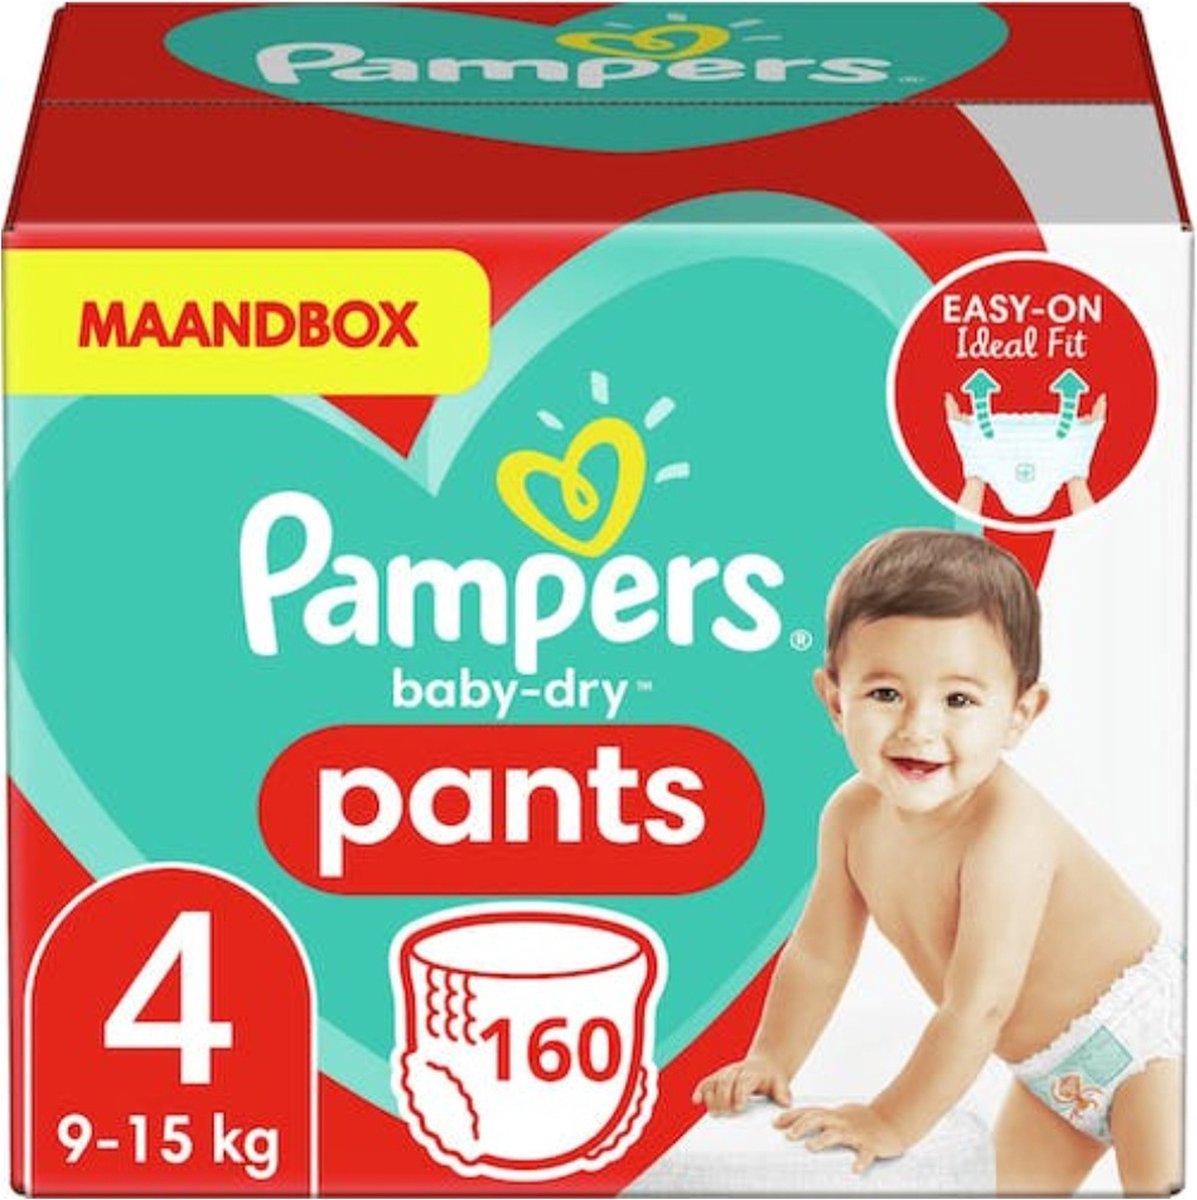 PAMPERS Nappy pants couches-culottes taille 6 (+15kg) 28 couches pas cher 